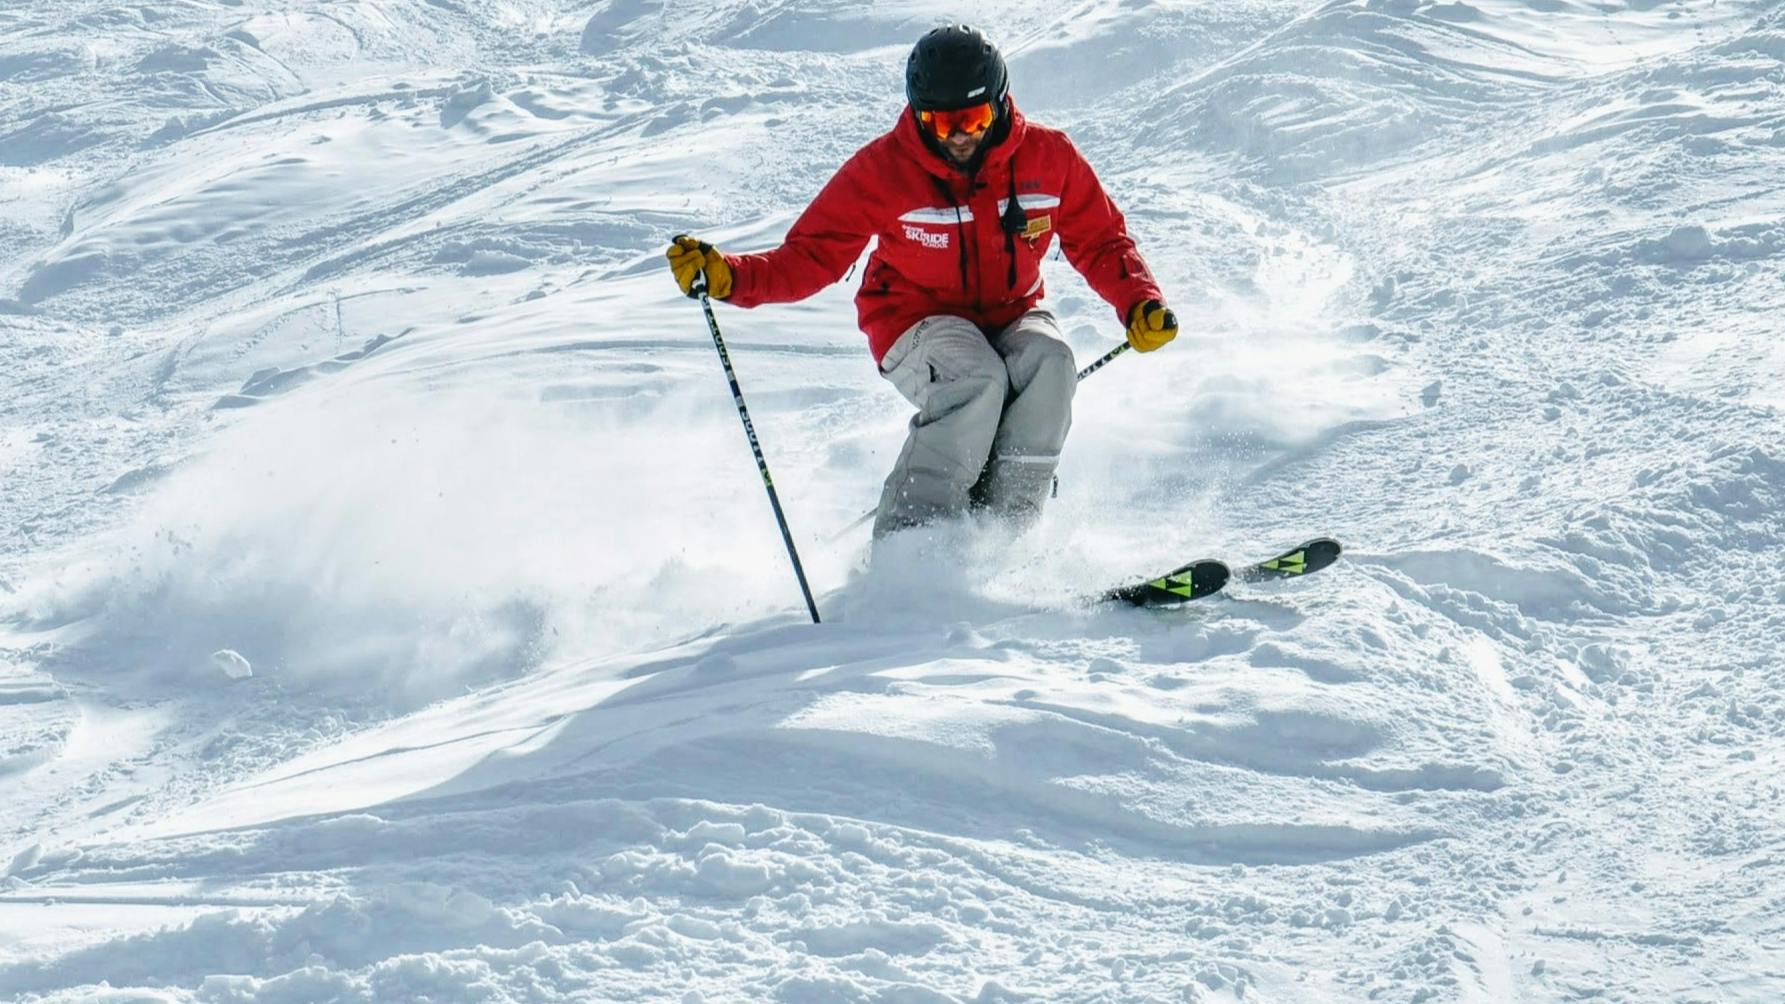 A skier in a bright red jacket skiing down moguls.